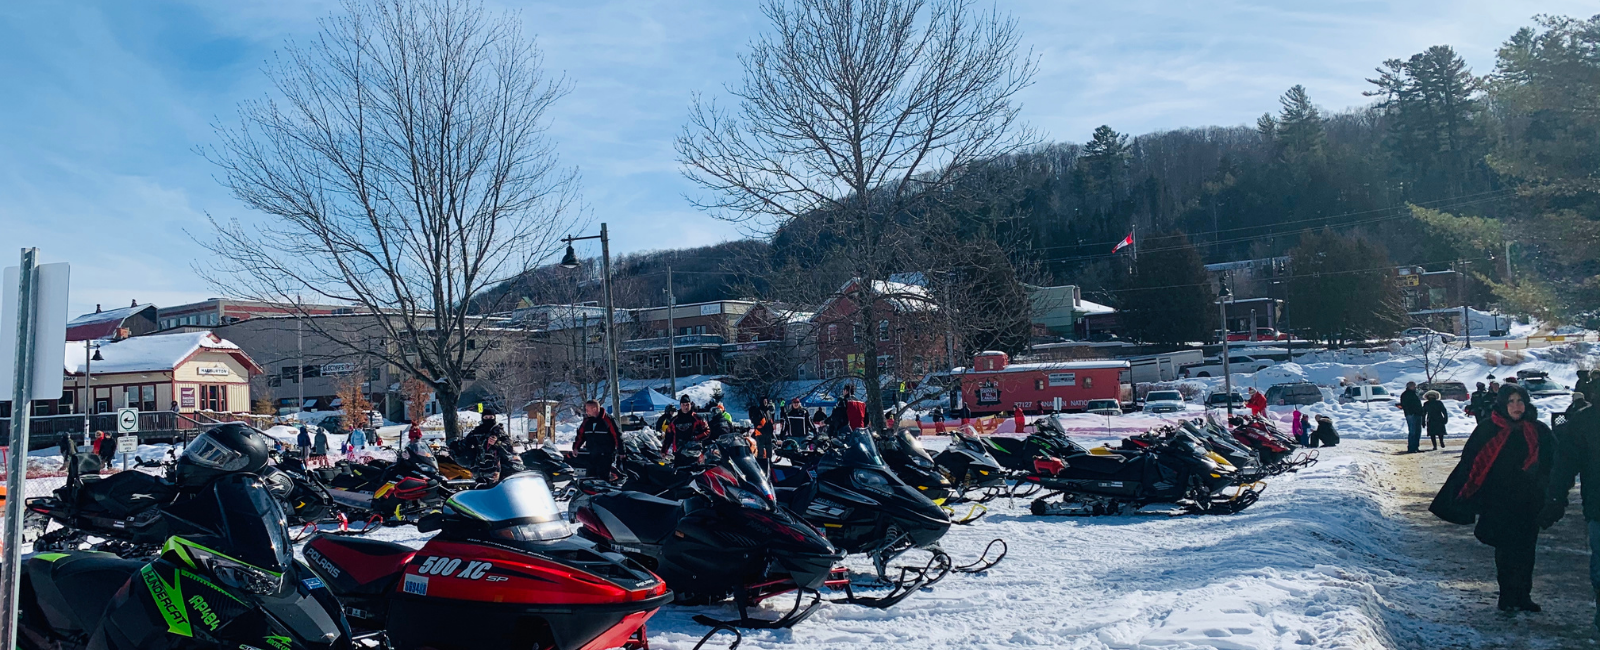 Snowmobiles at Frost Festival 2019.